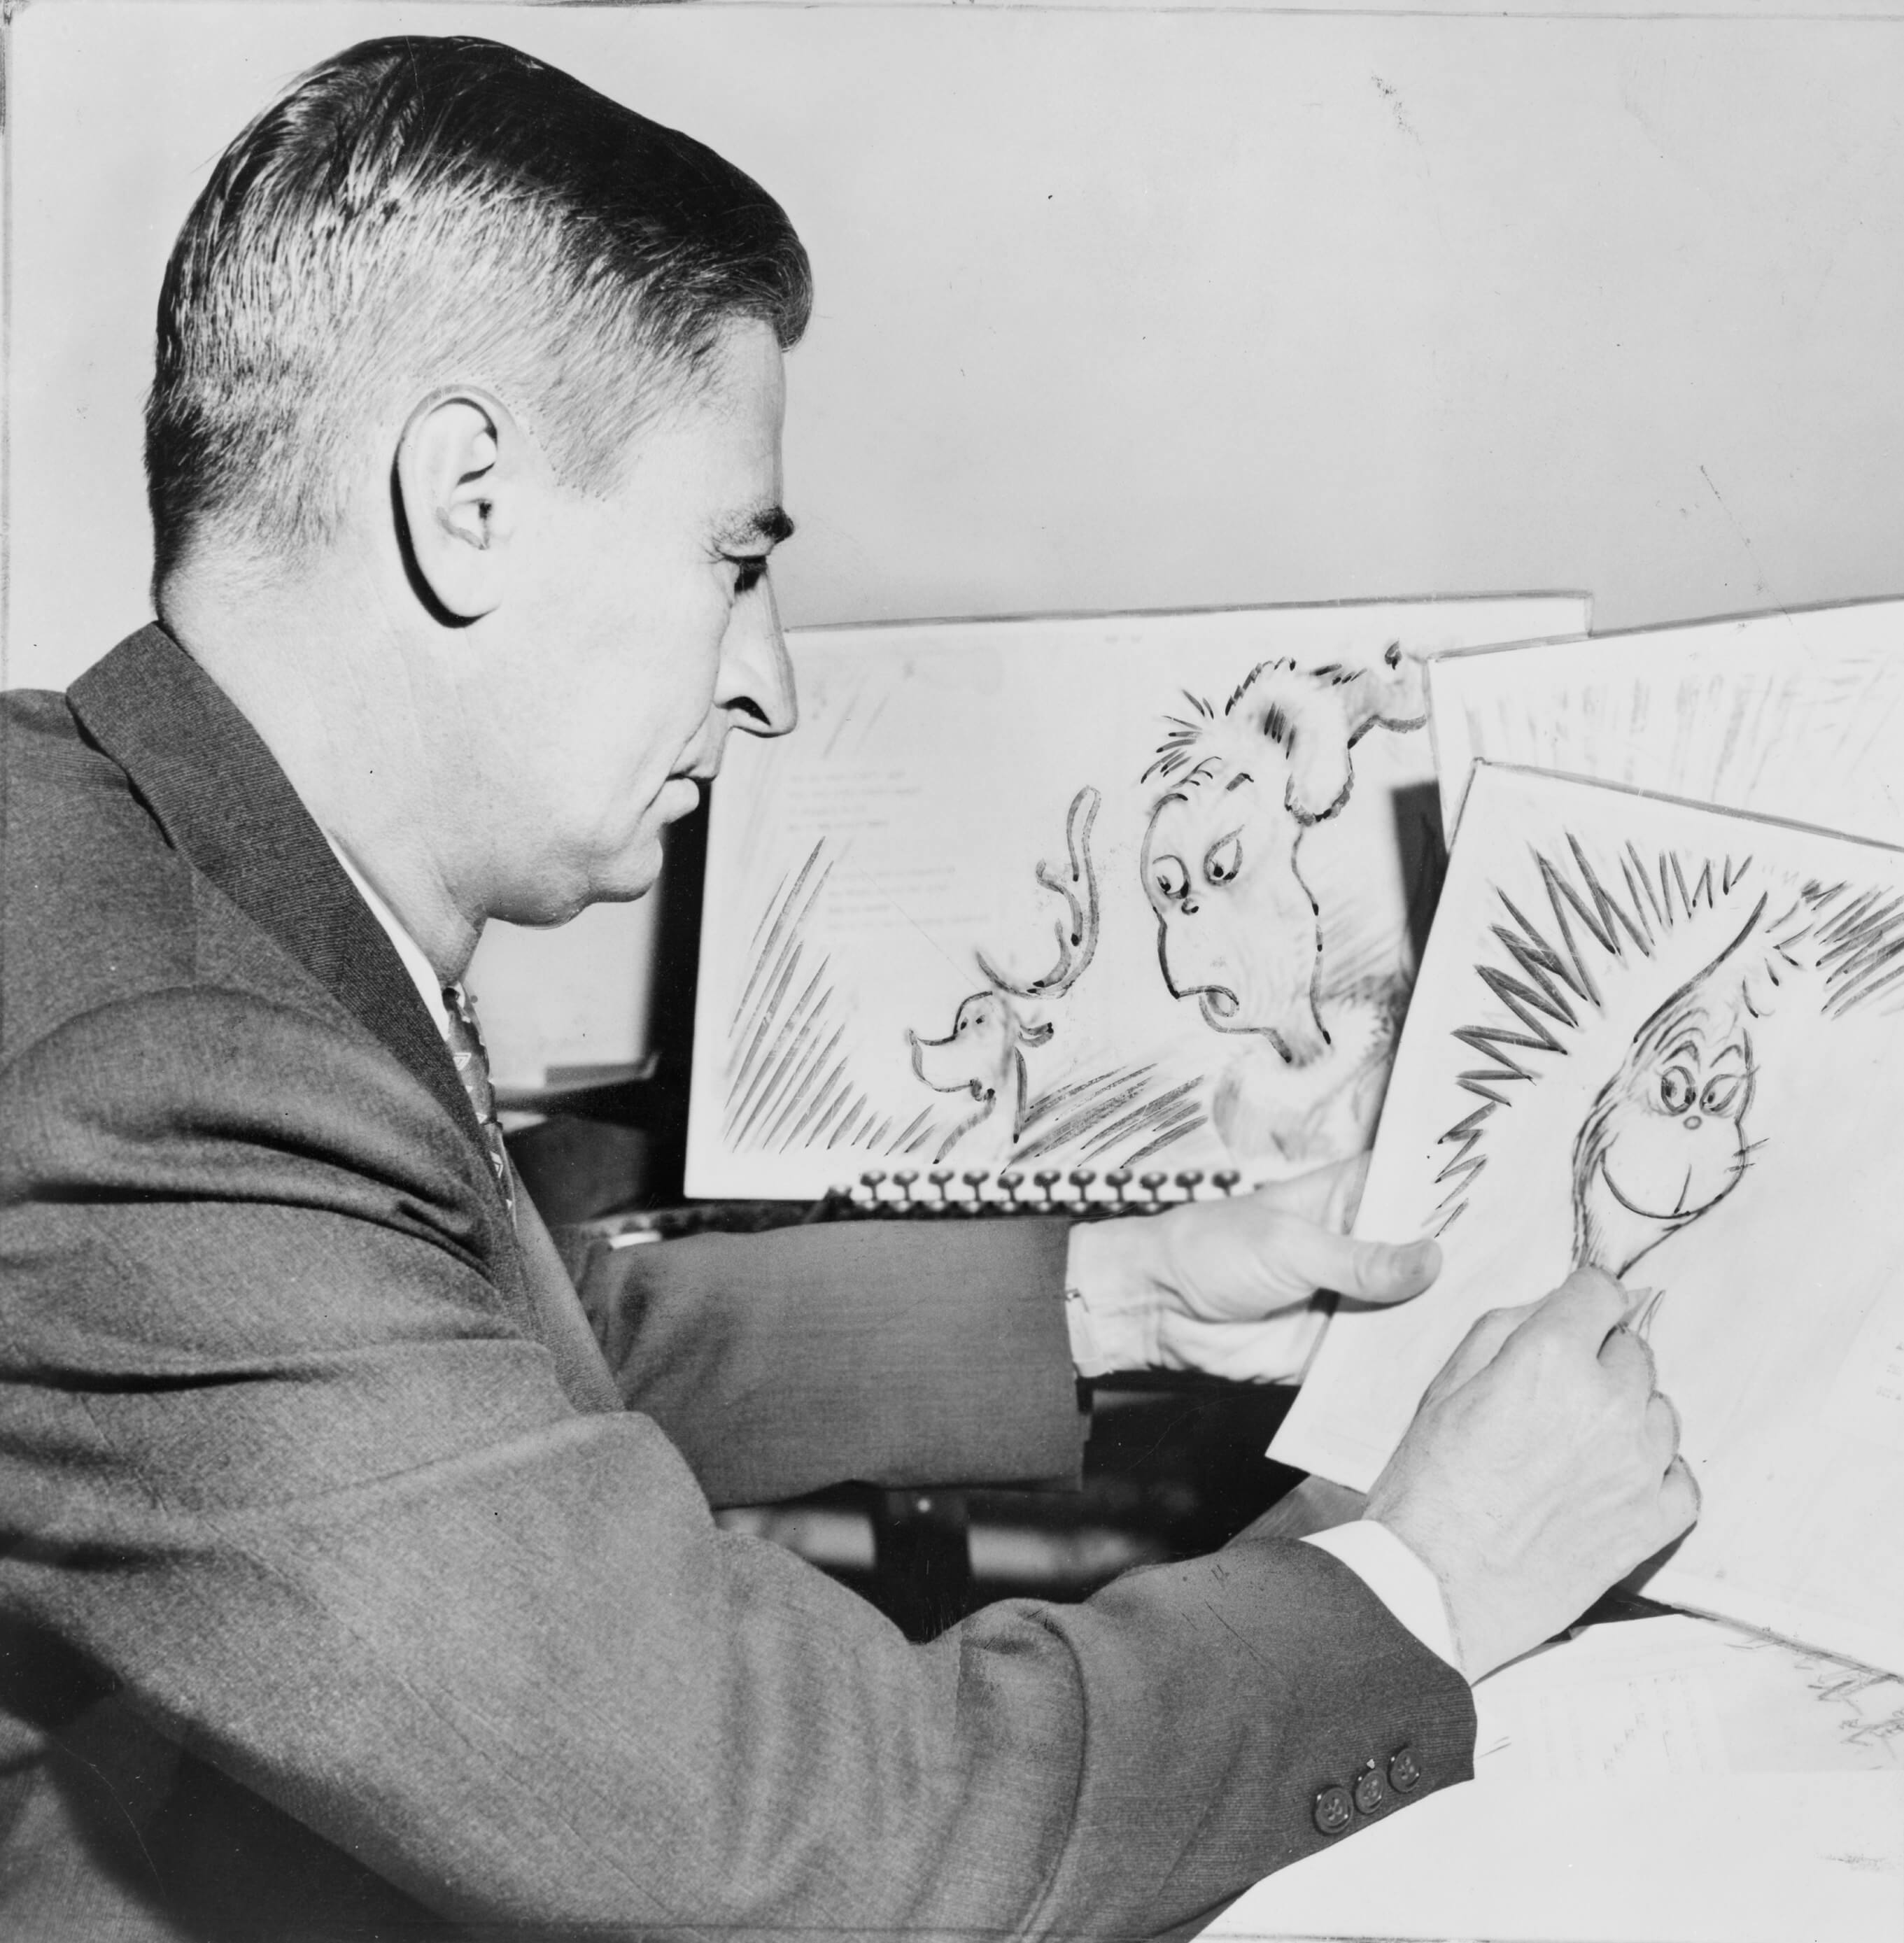 Dr. Seuss with Grinch drawing